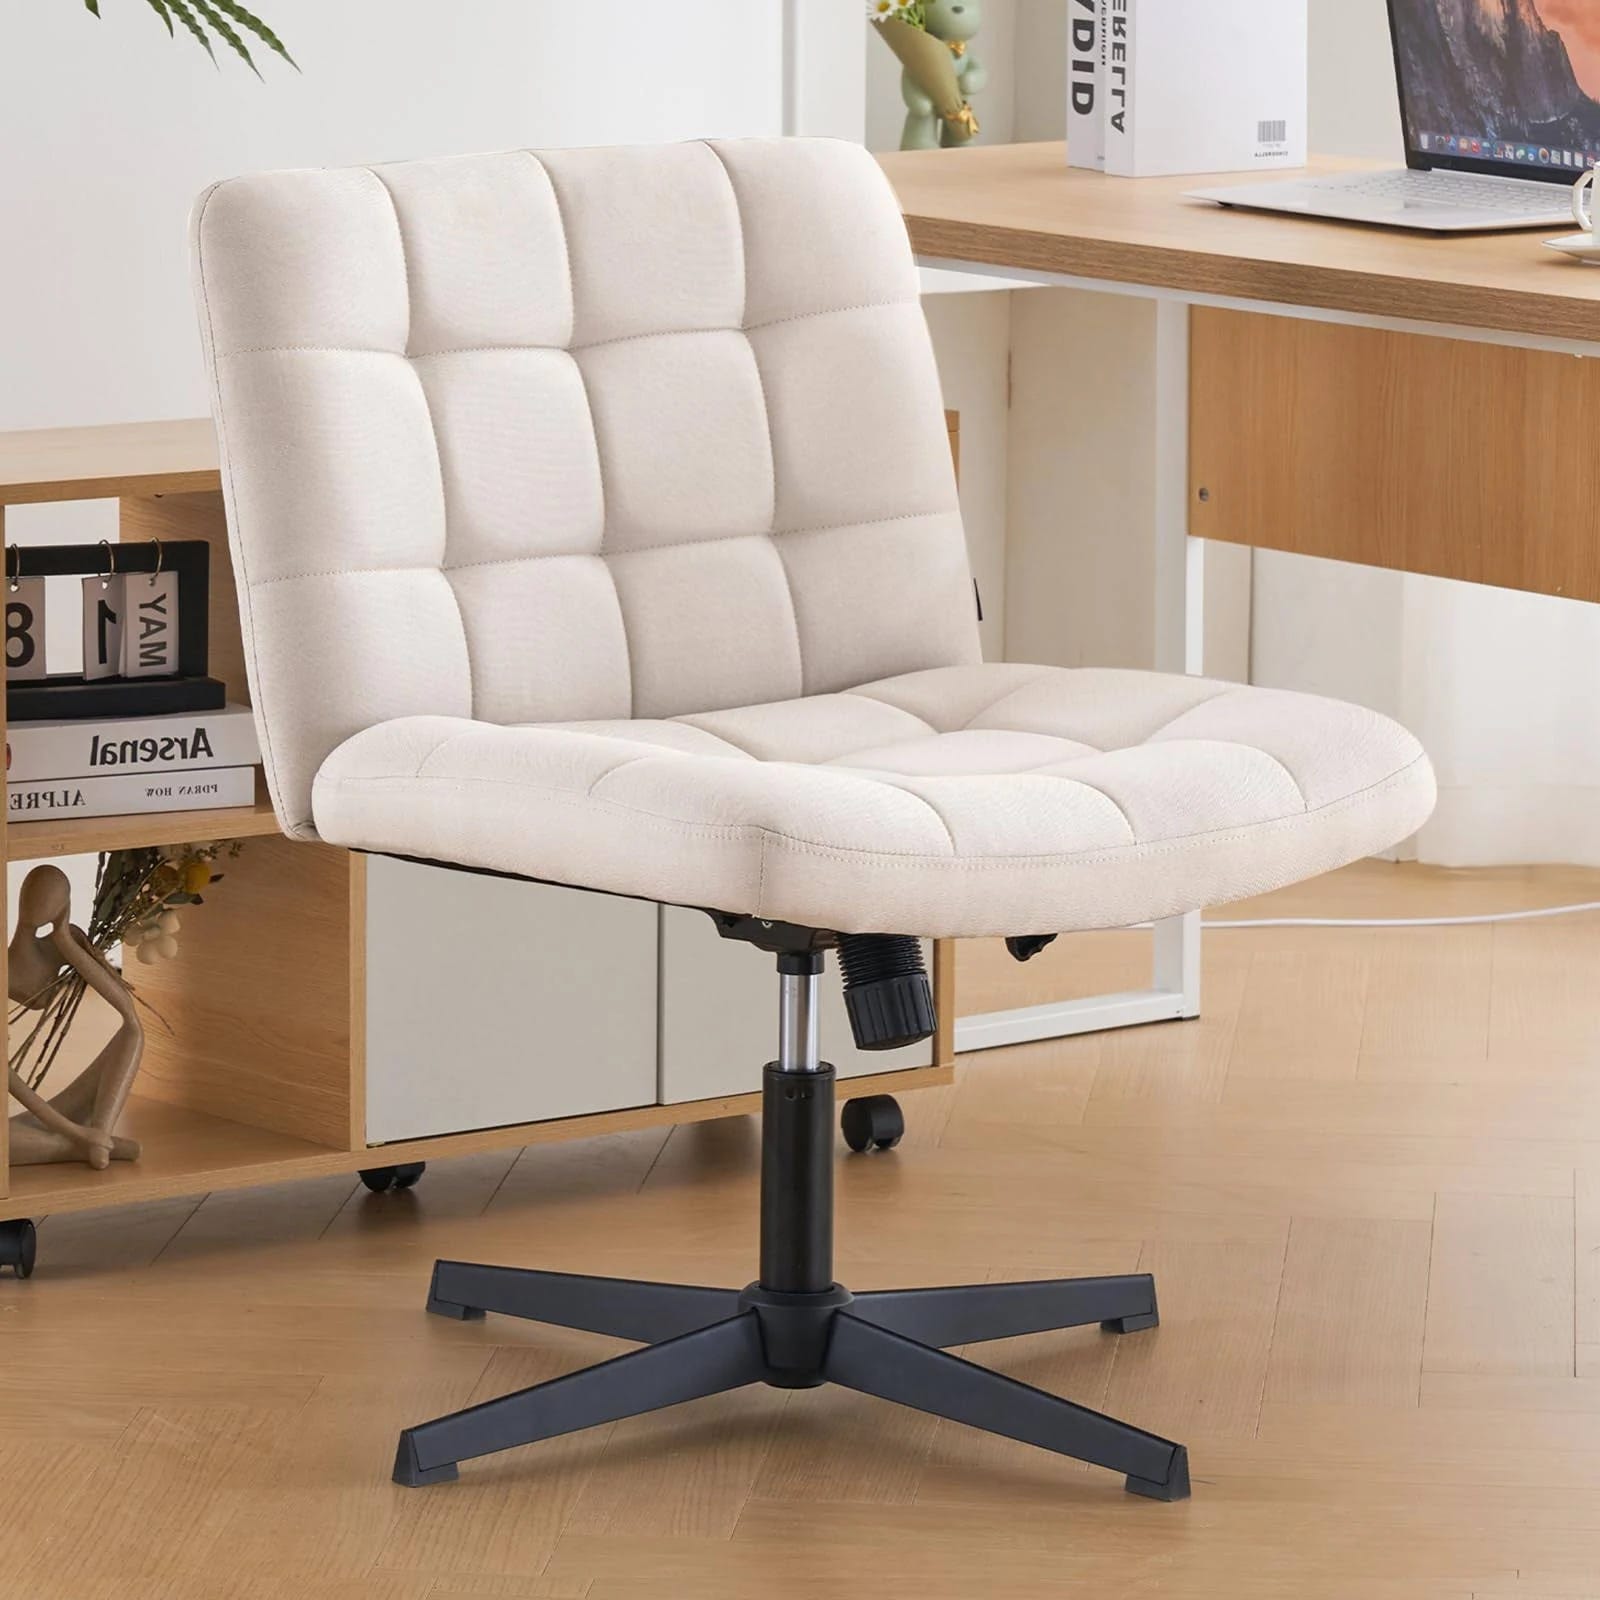 Comfortable Swivel Armless Office Chair No Wheels | Image